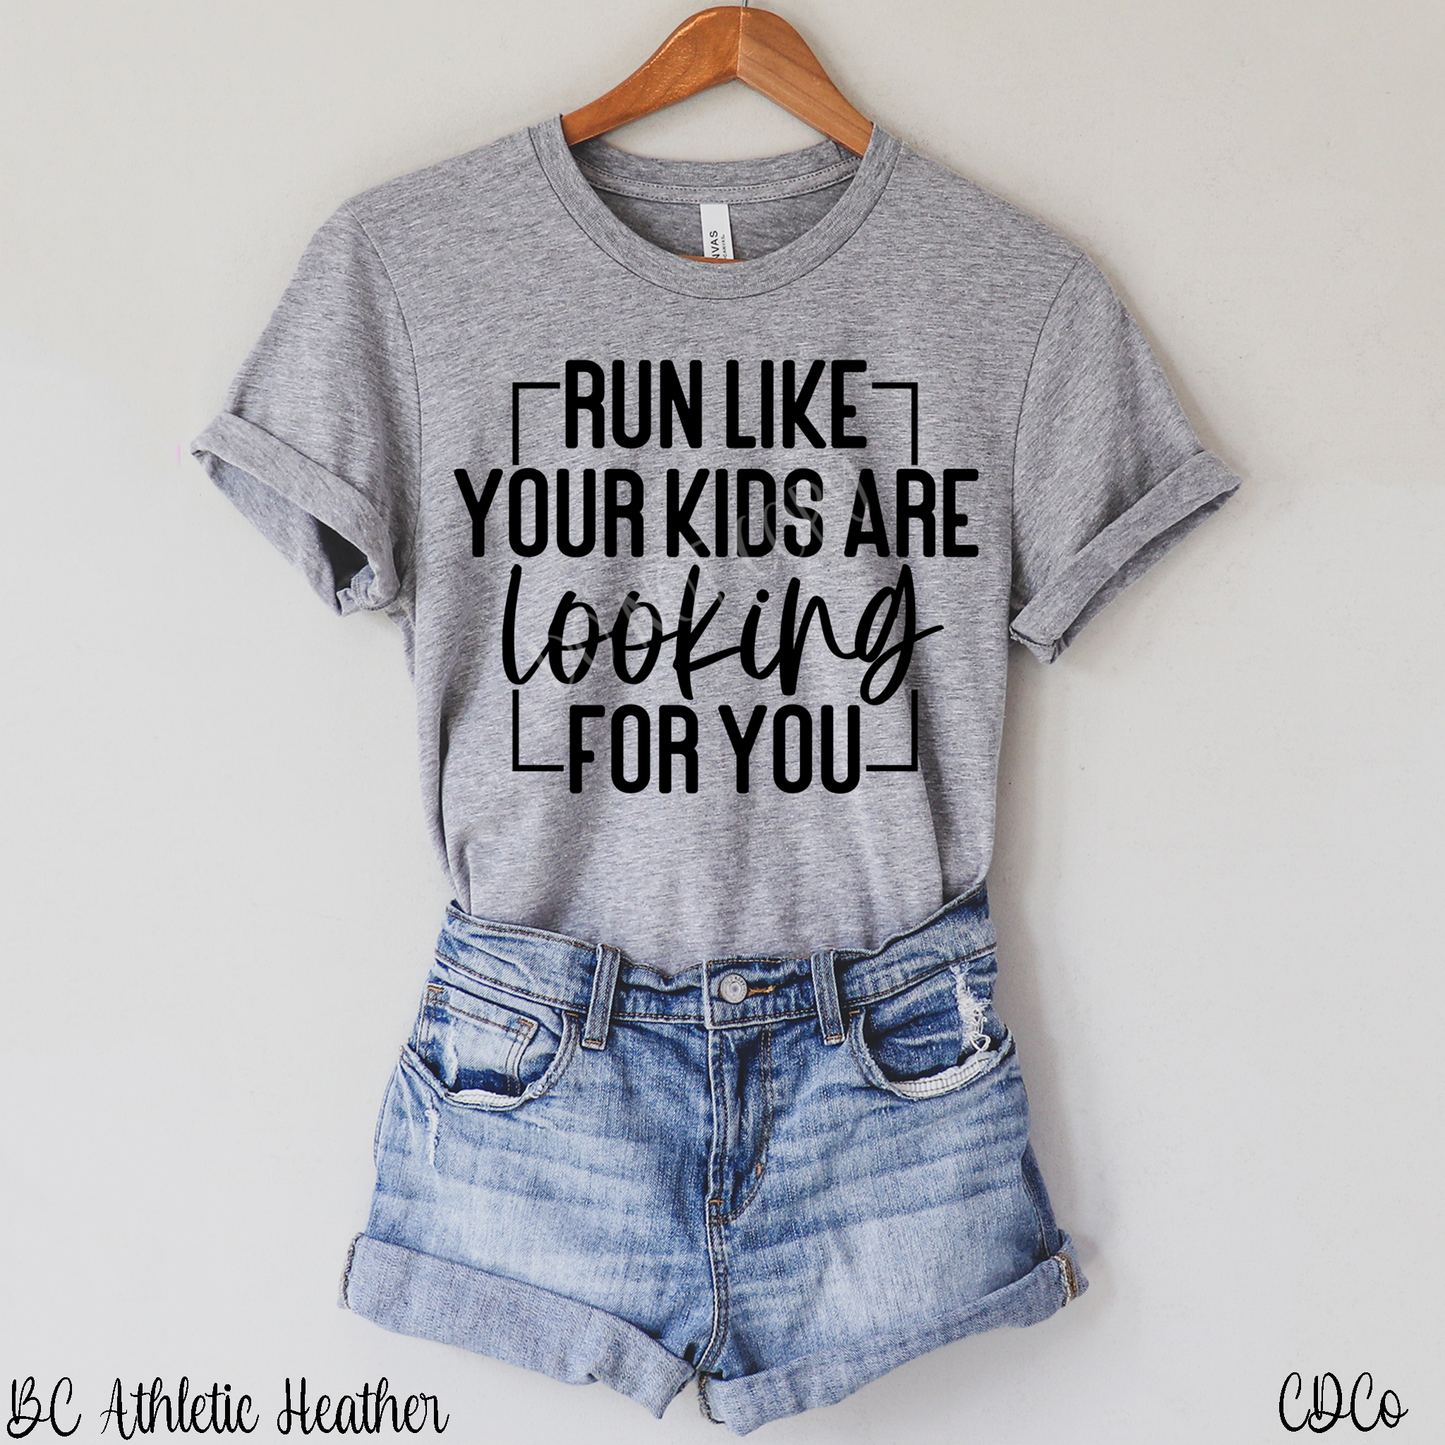 Run Like Your Kids Are Looking For You (325°)